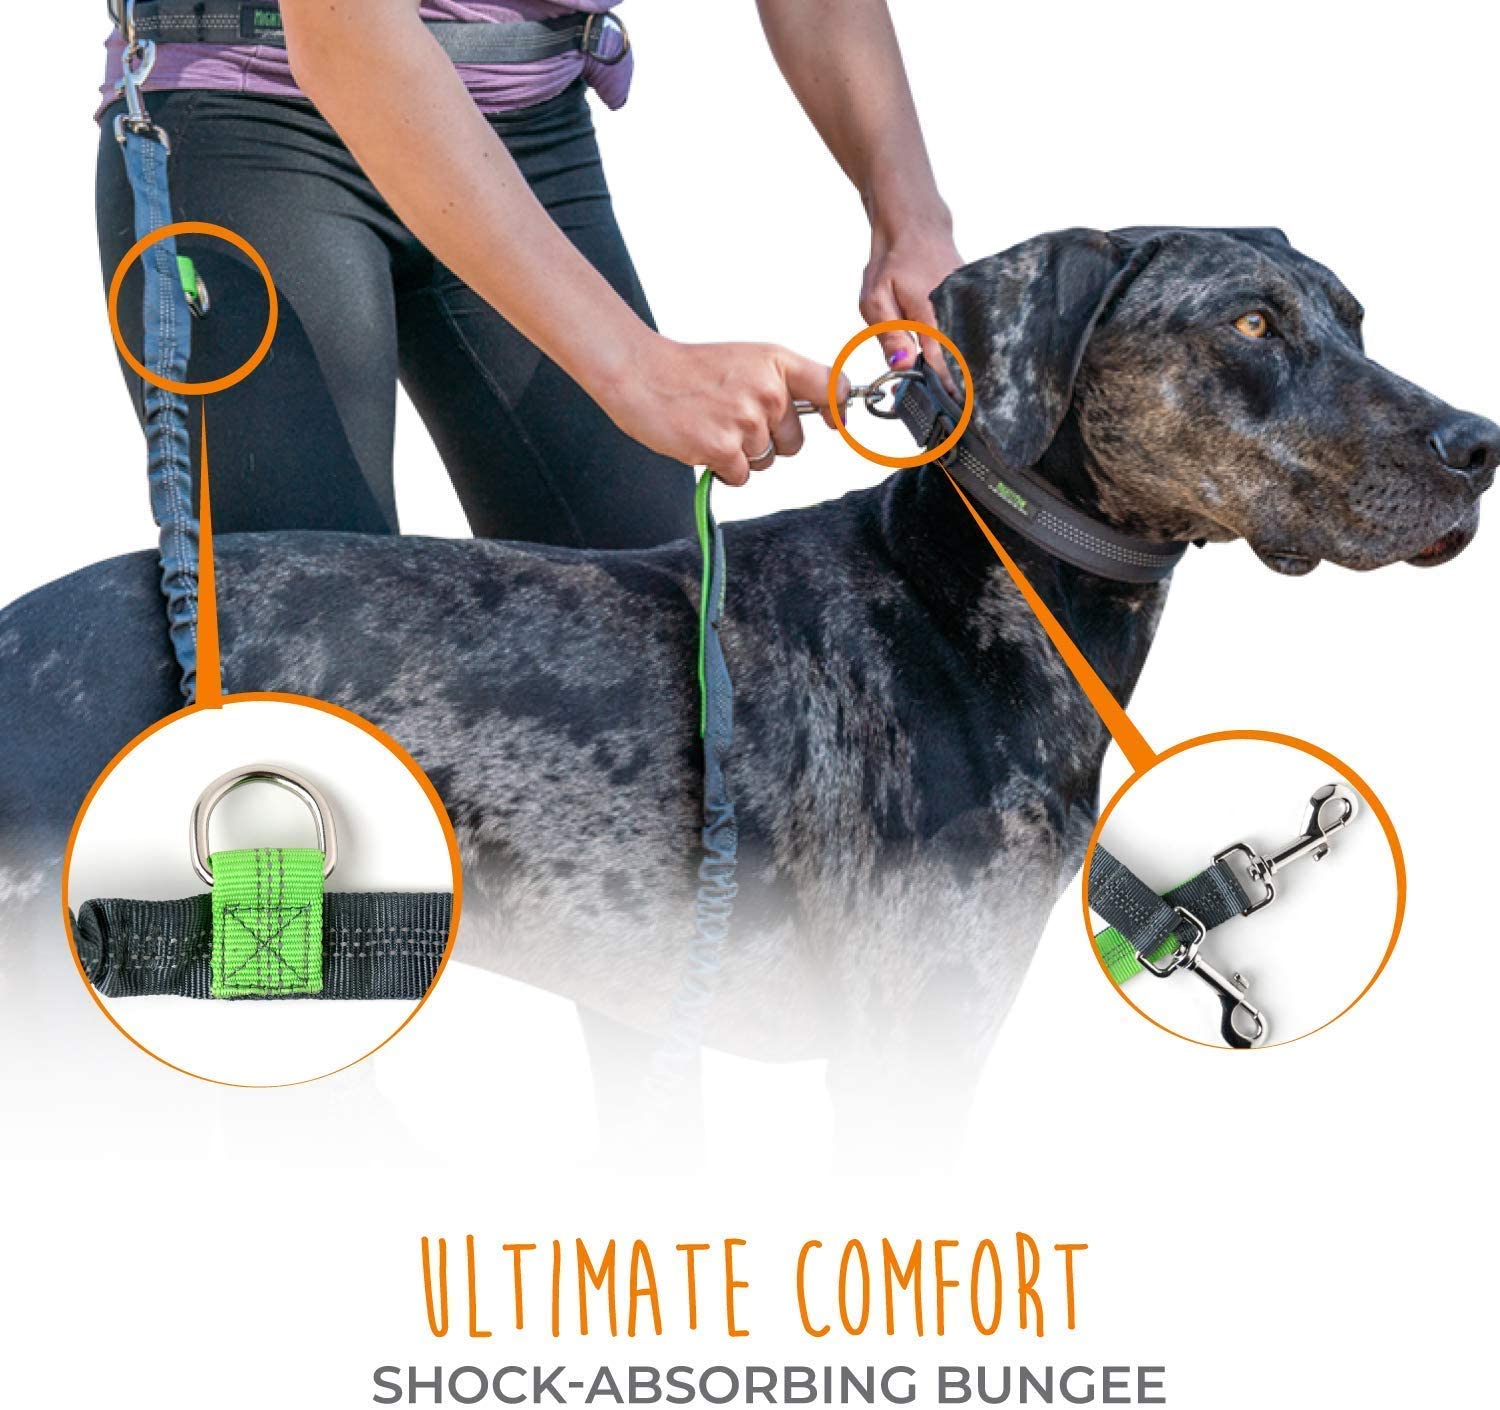 Mighty Paw Hands-Free Bungee Leash Set for Active Dog Owners